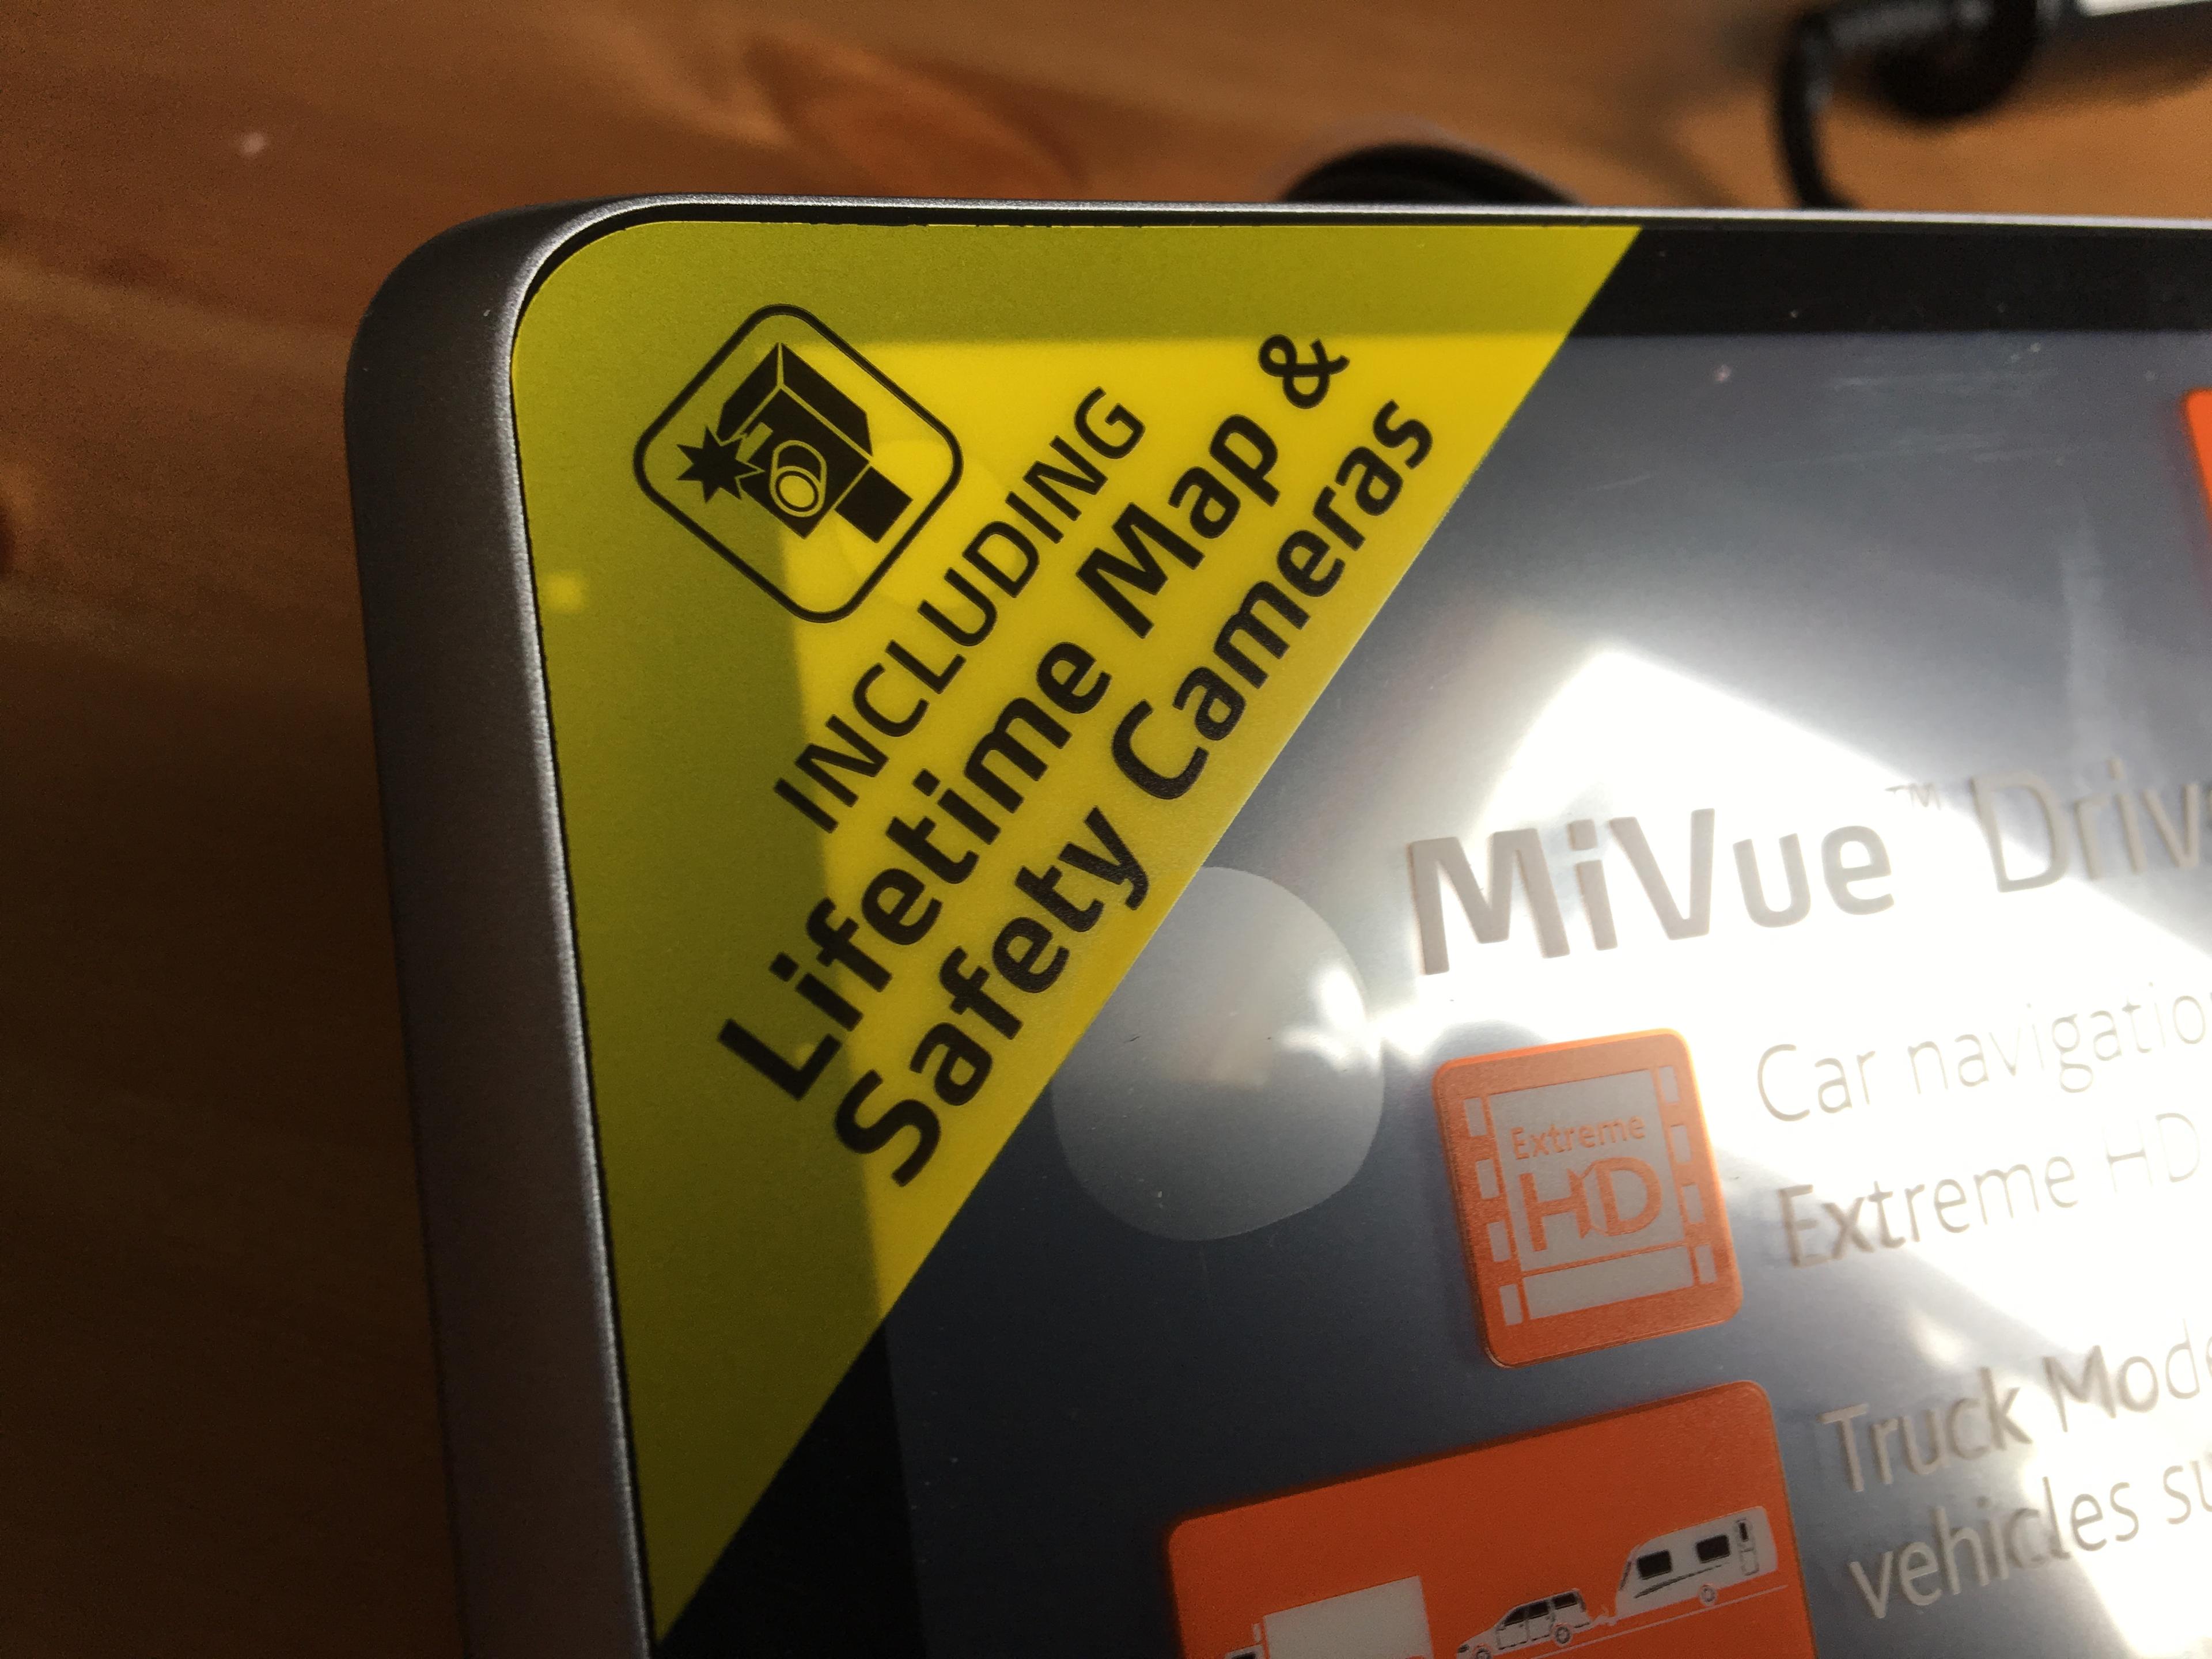 MiVue Drive 65 LM navigation test: navigation and camera in one – image 2